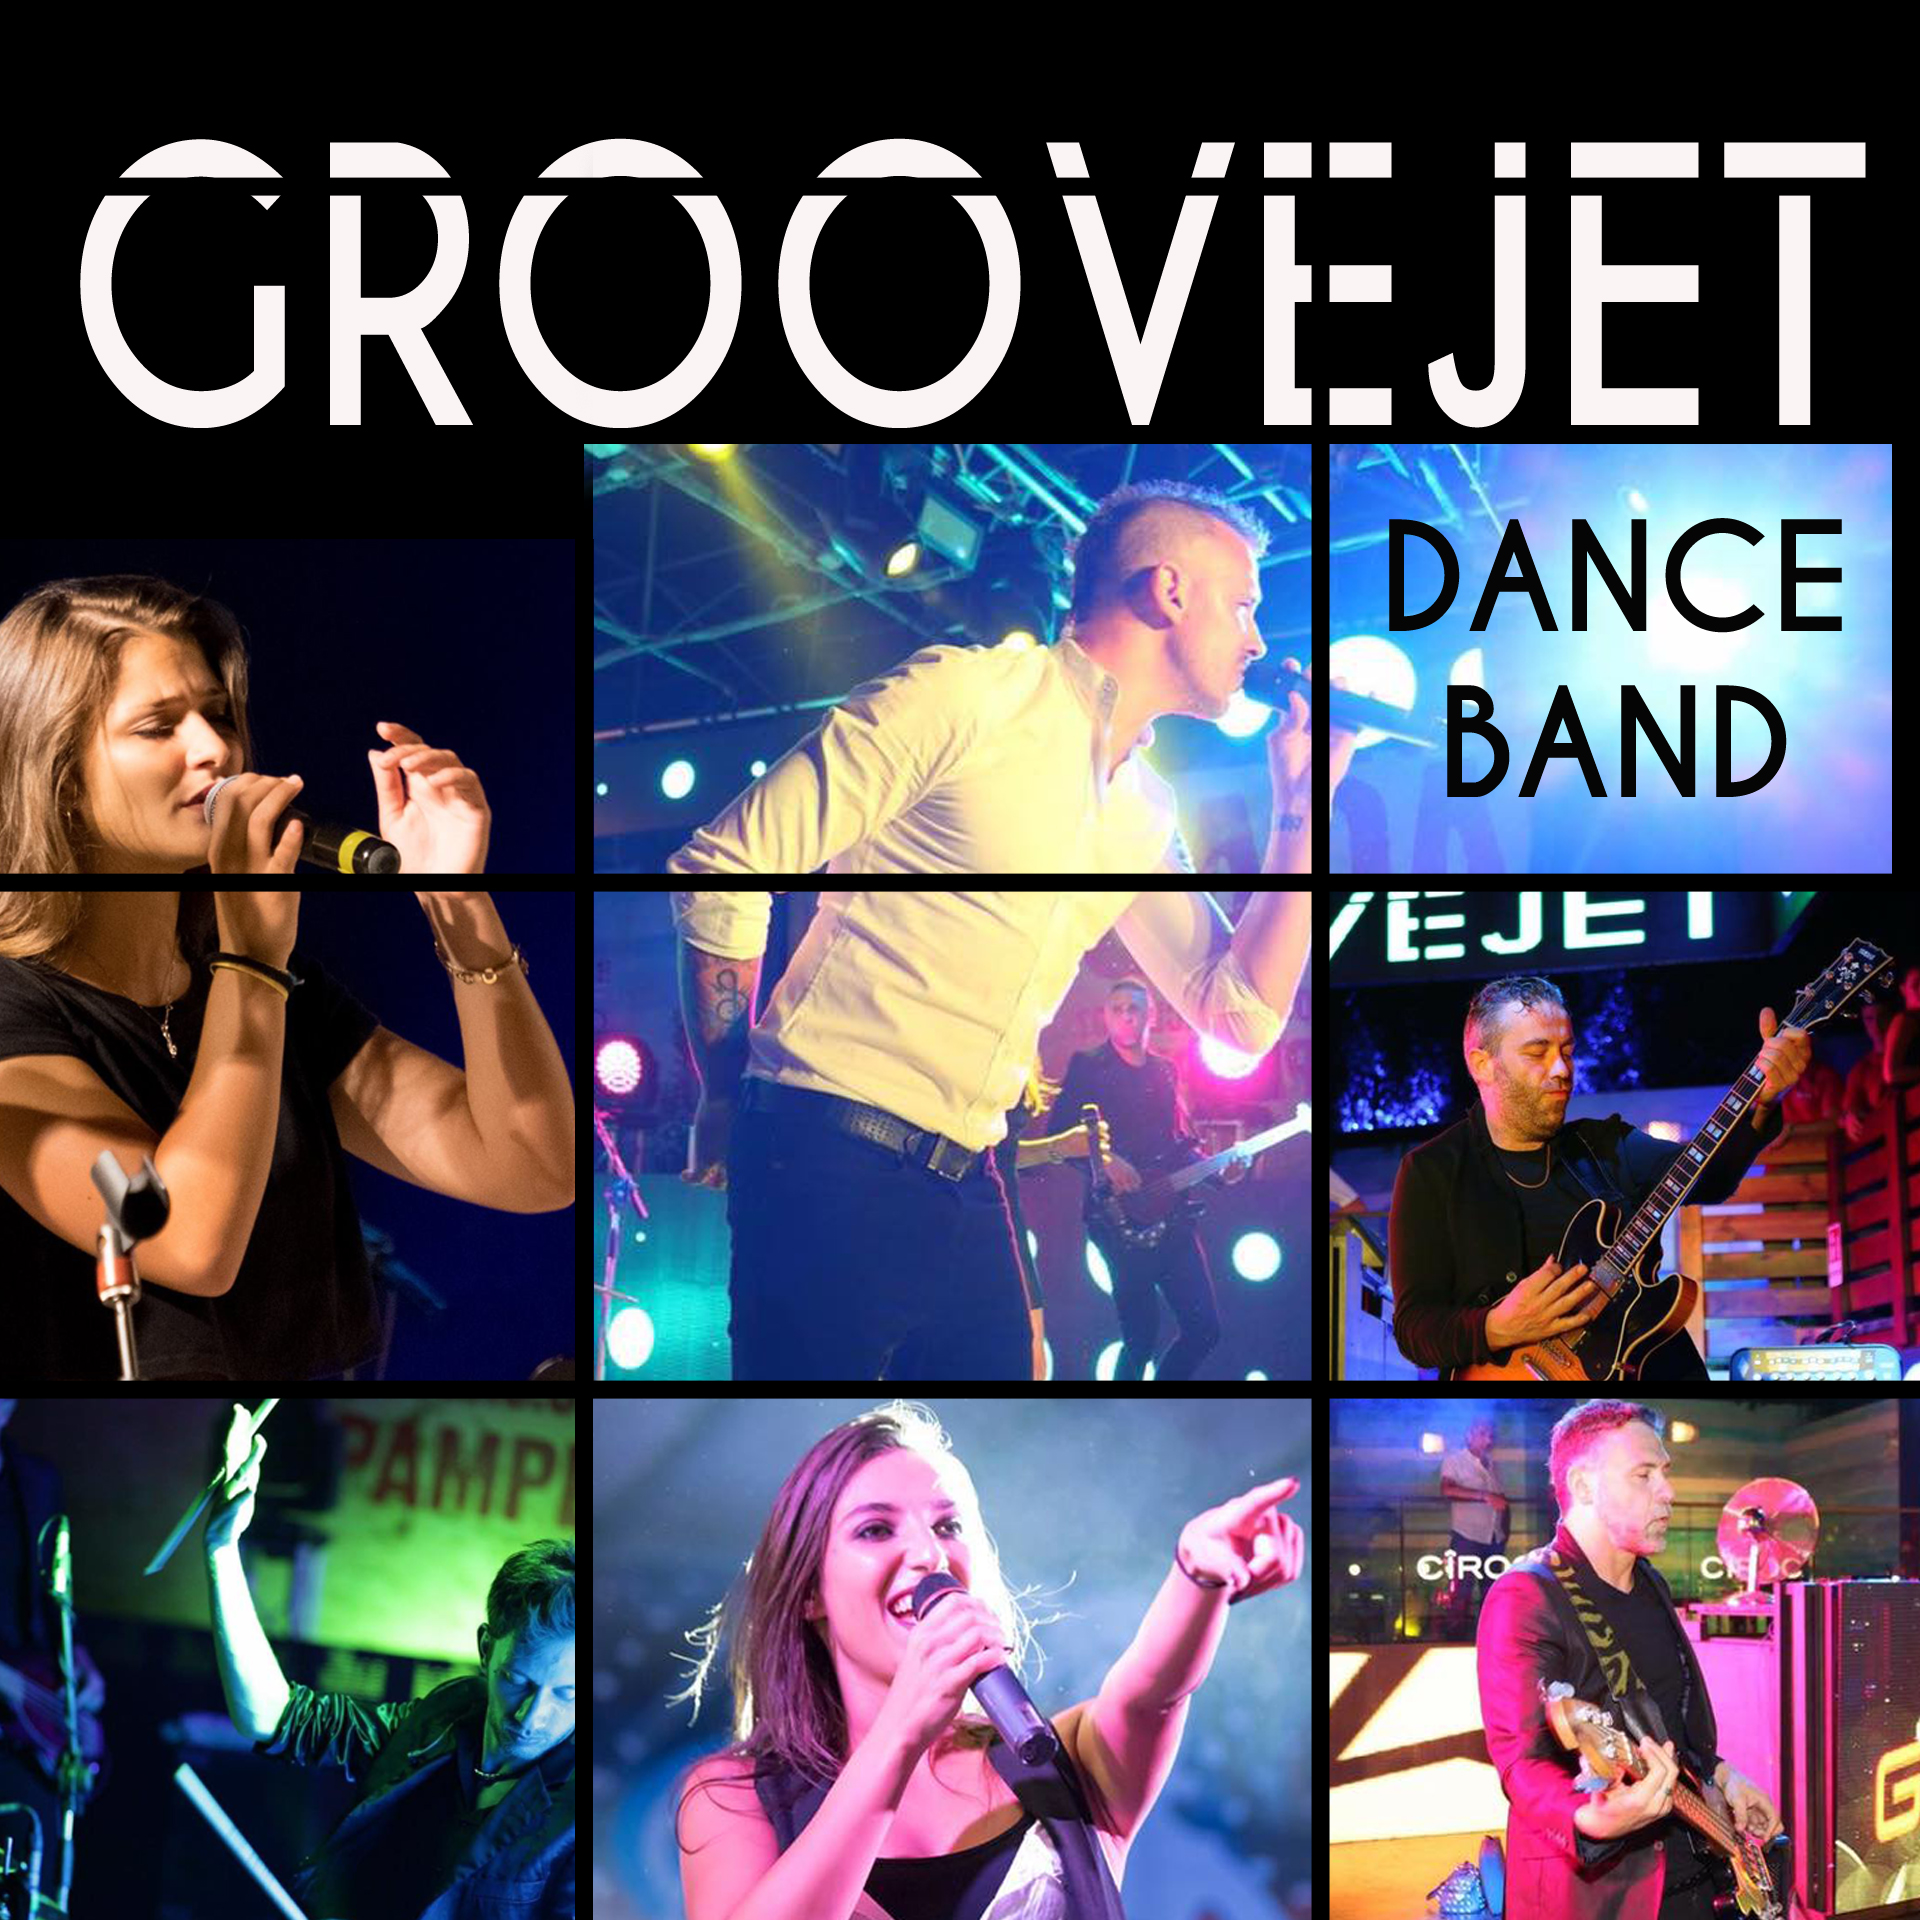 Foto Groovejet Dabce Band